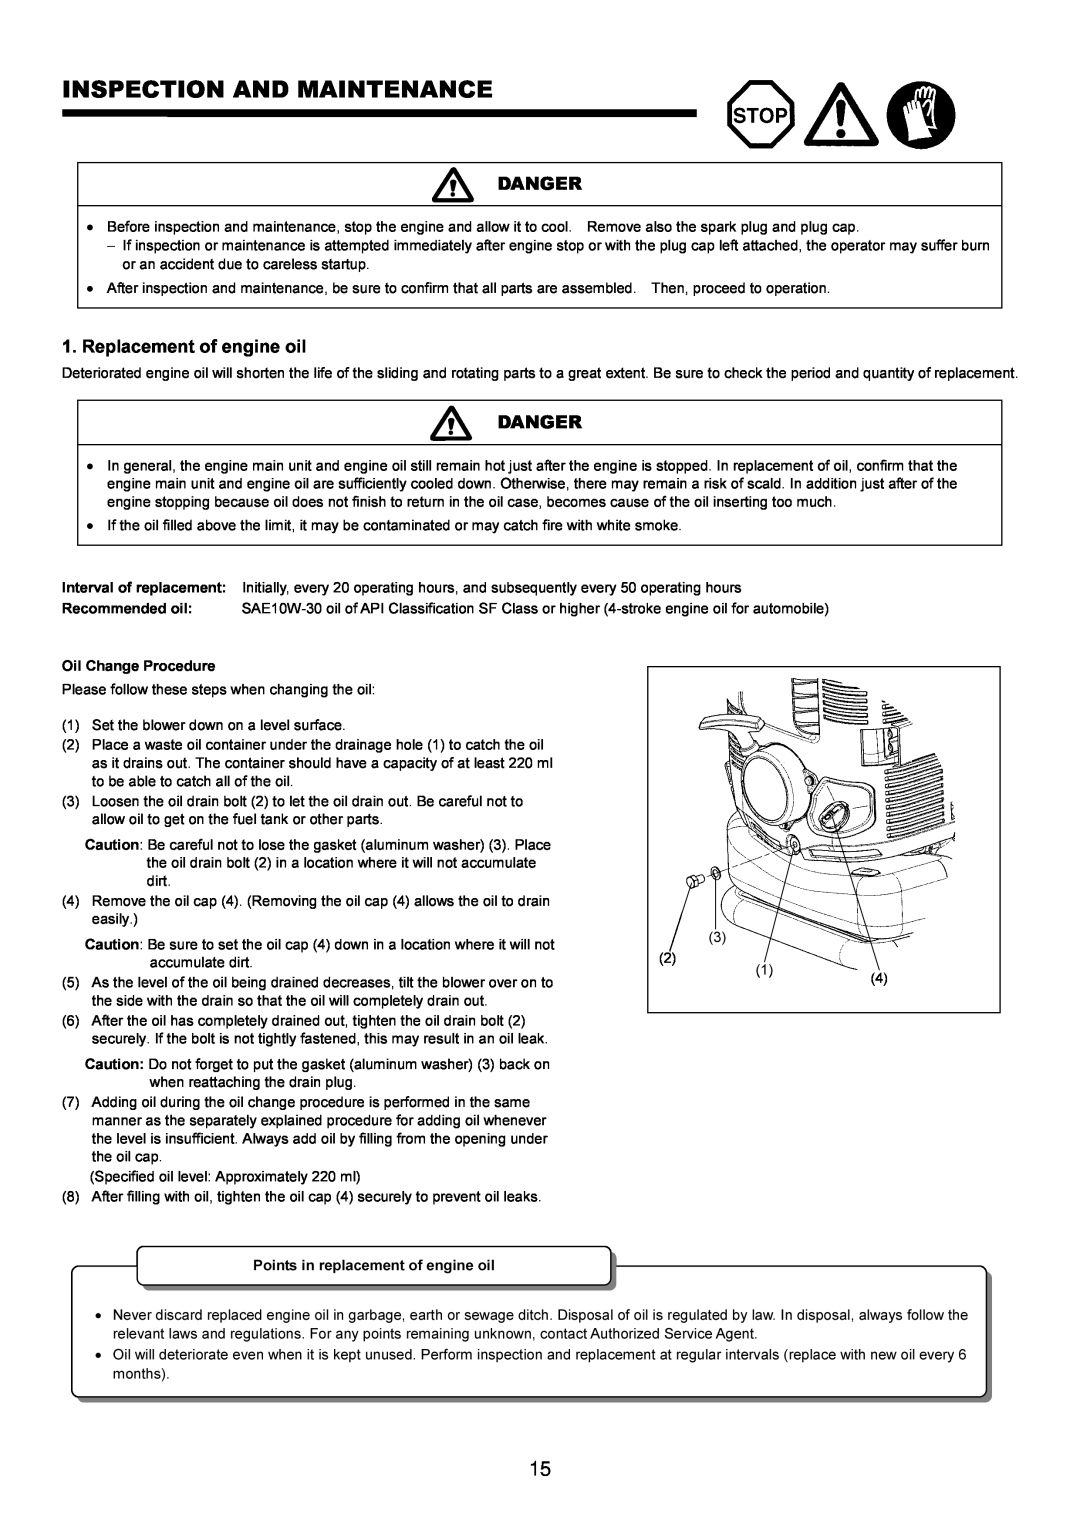 Makita BBX7600CA instruction manual Inspection And Maintenance, Danger, Replacement of engine oil 